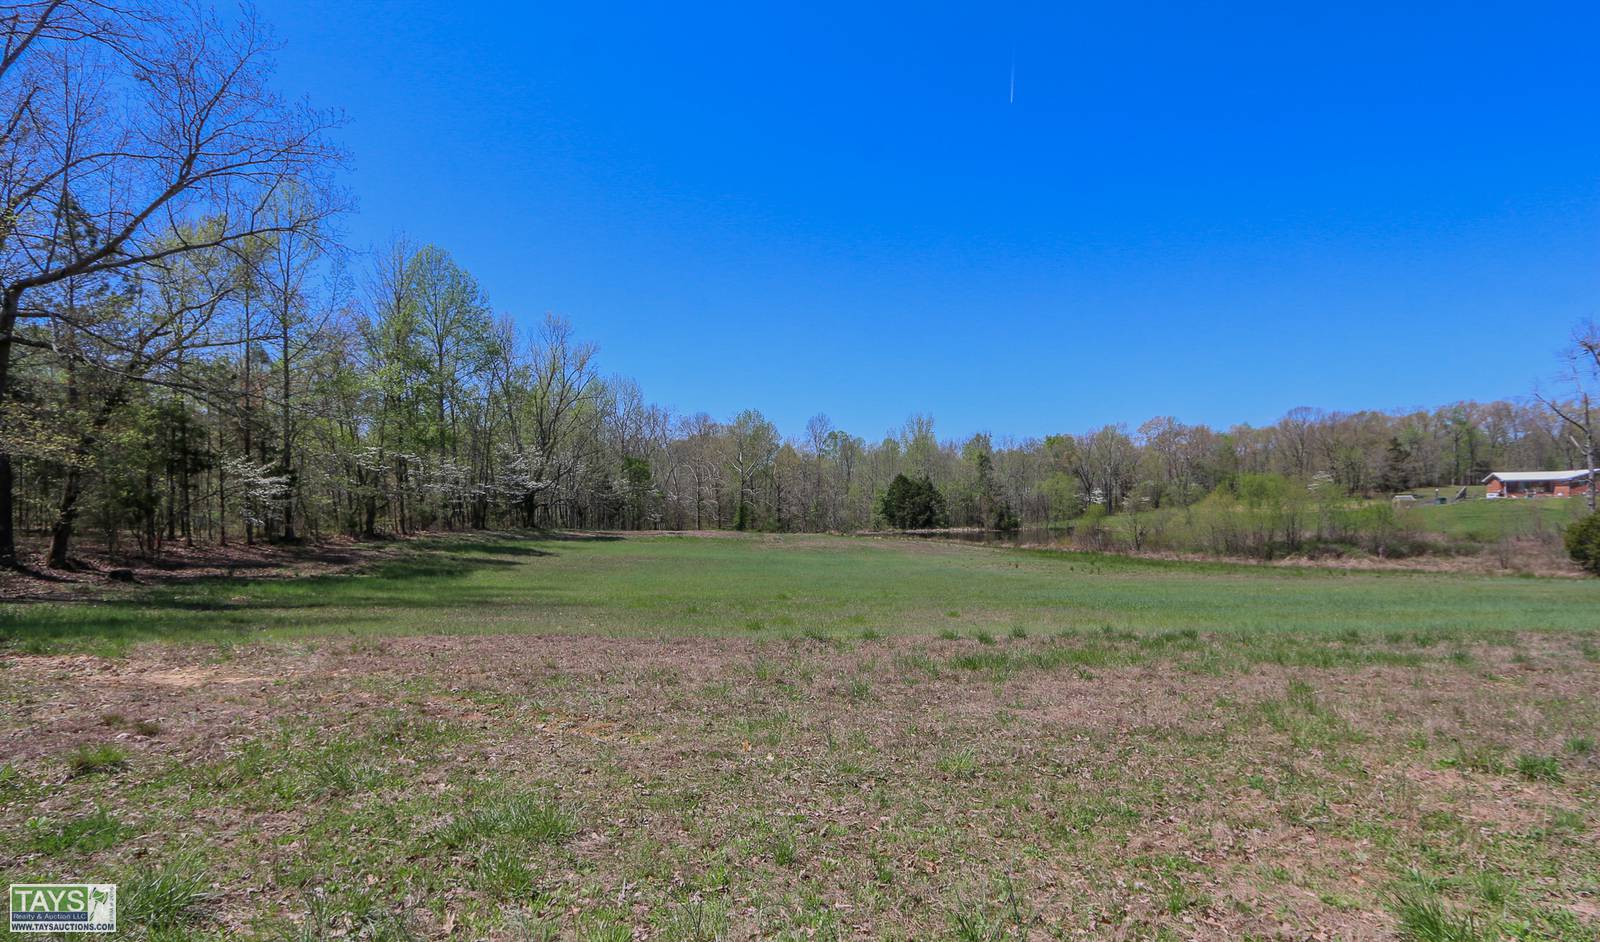 ONLINE ABSOLUTE AUCTION: 5.92 Ac± TRACT with POND